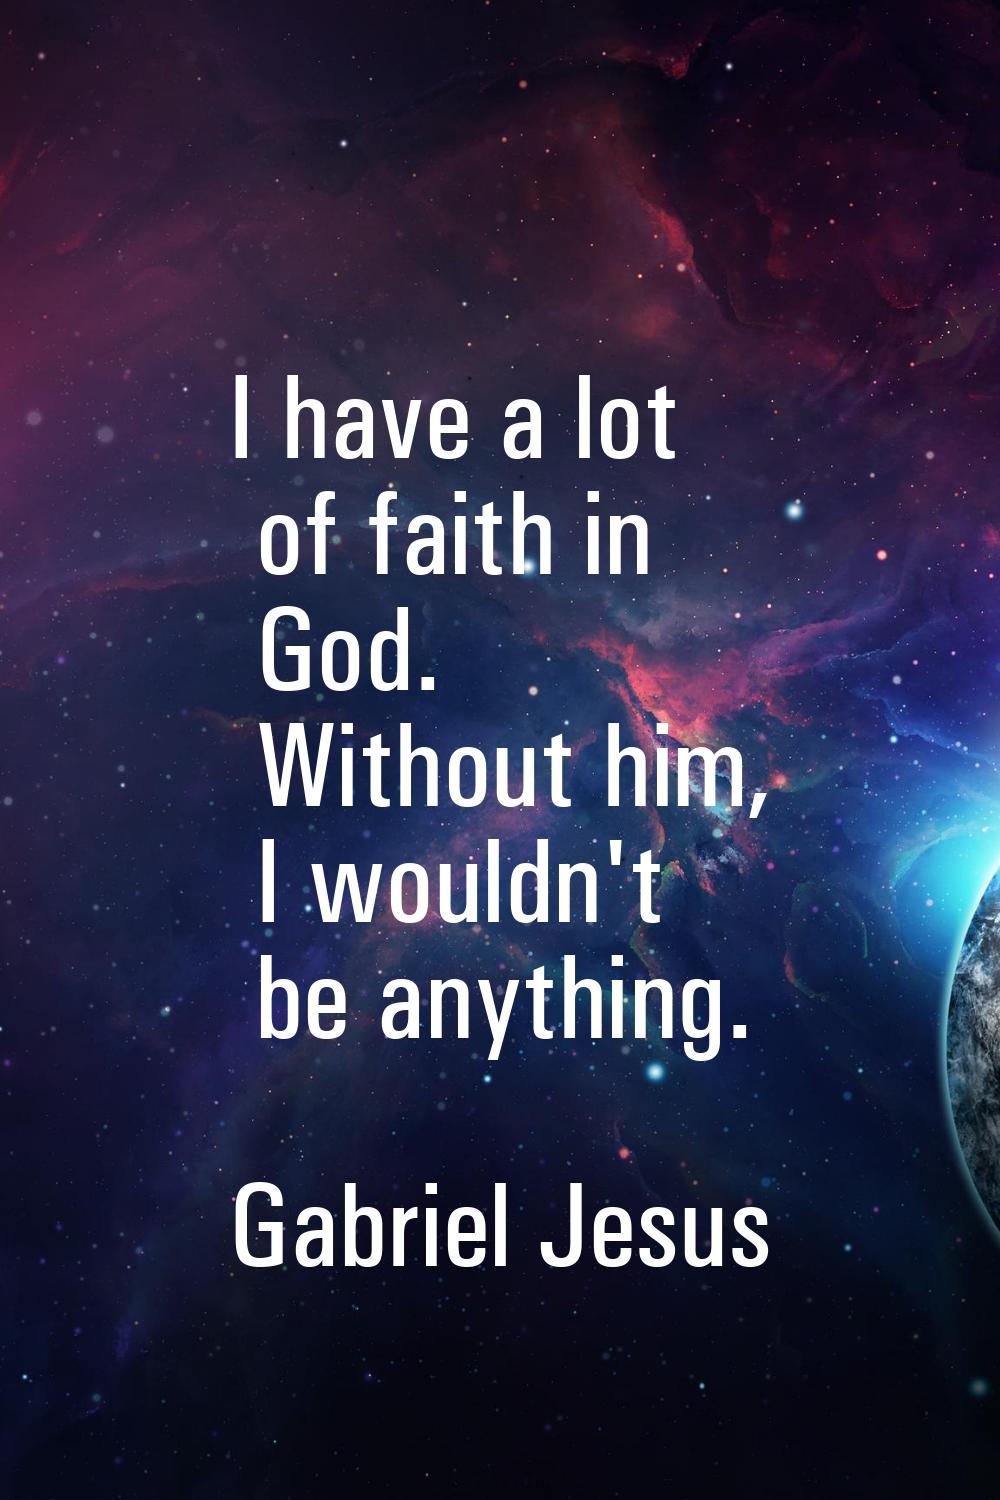 I have a lot of faith in God. Without him, I wouldn't be anything.